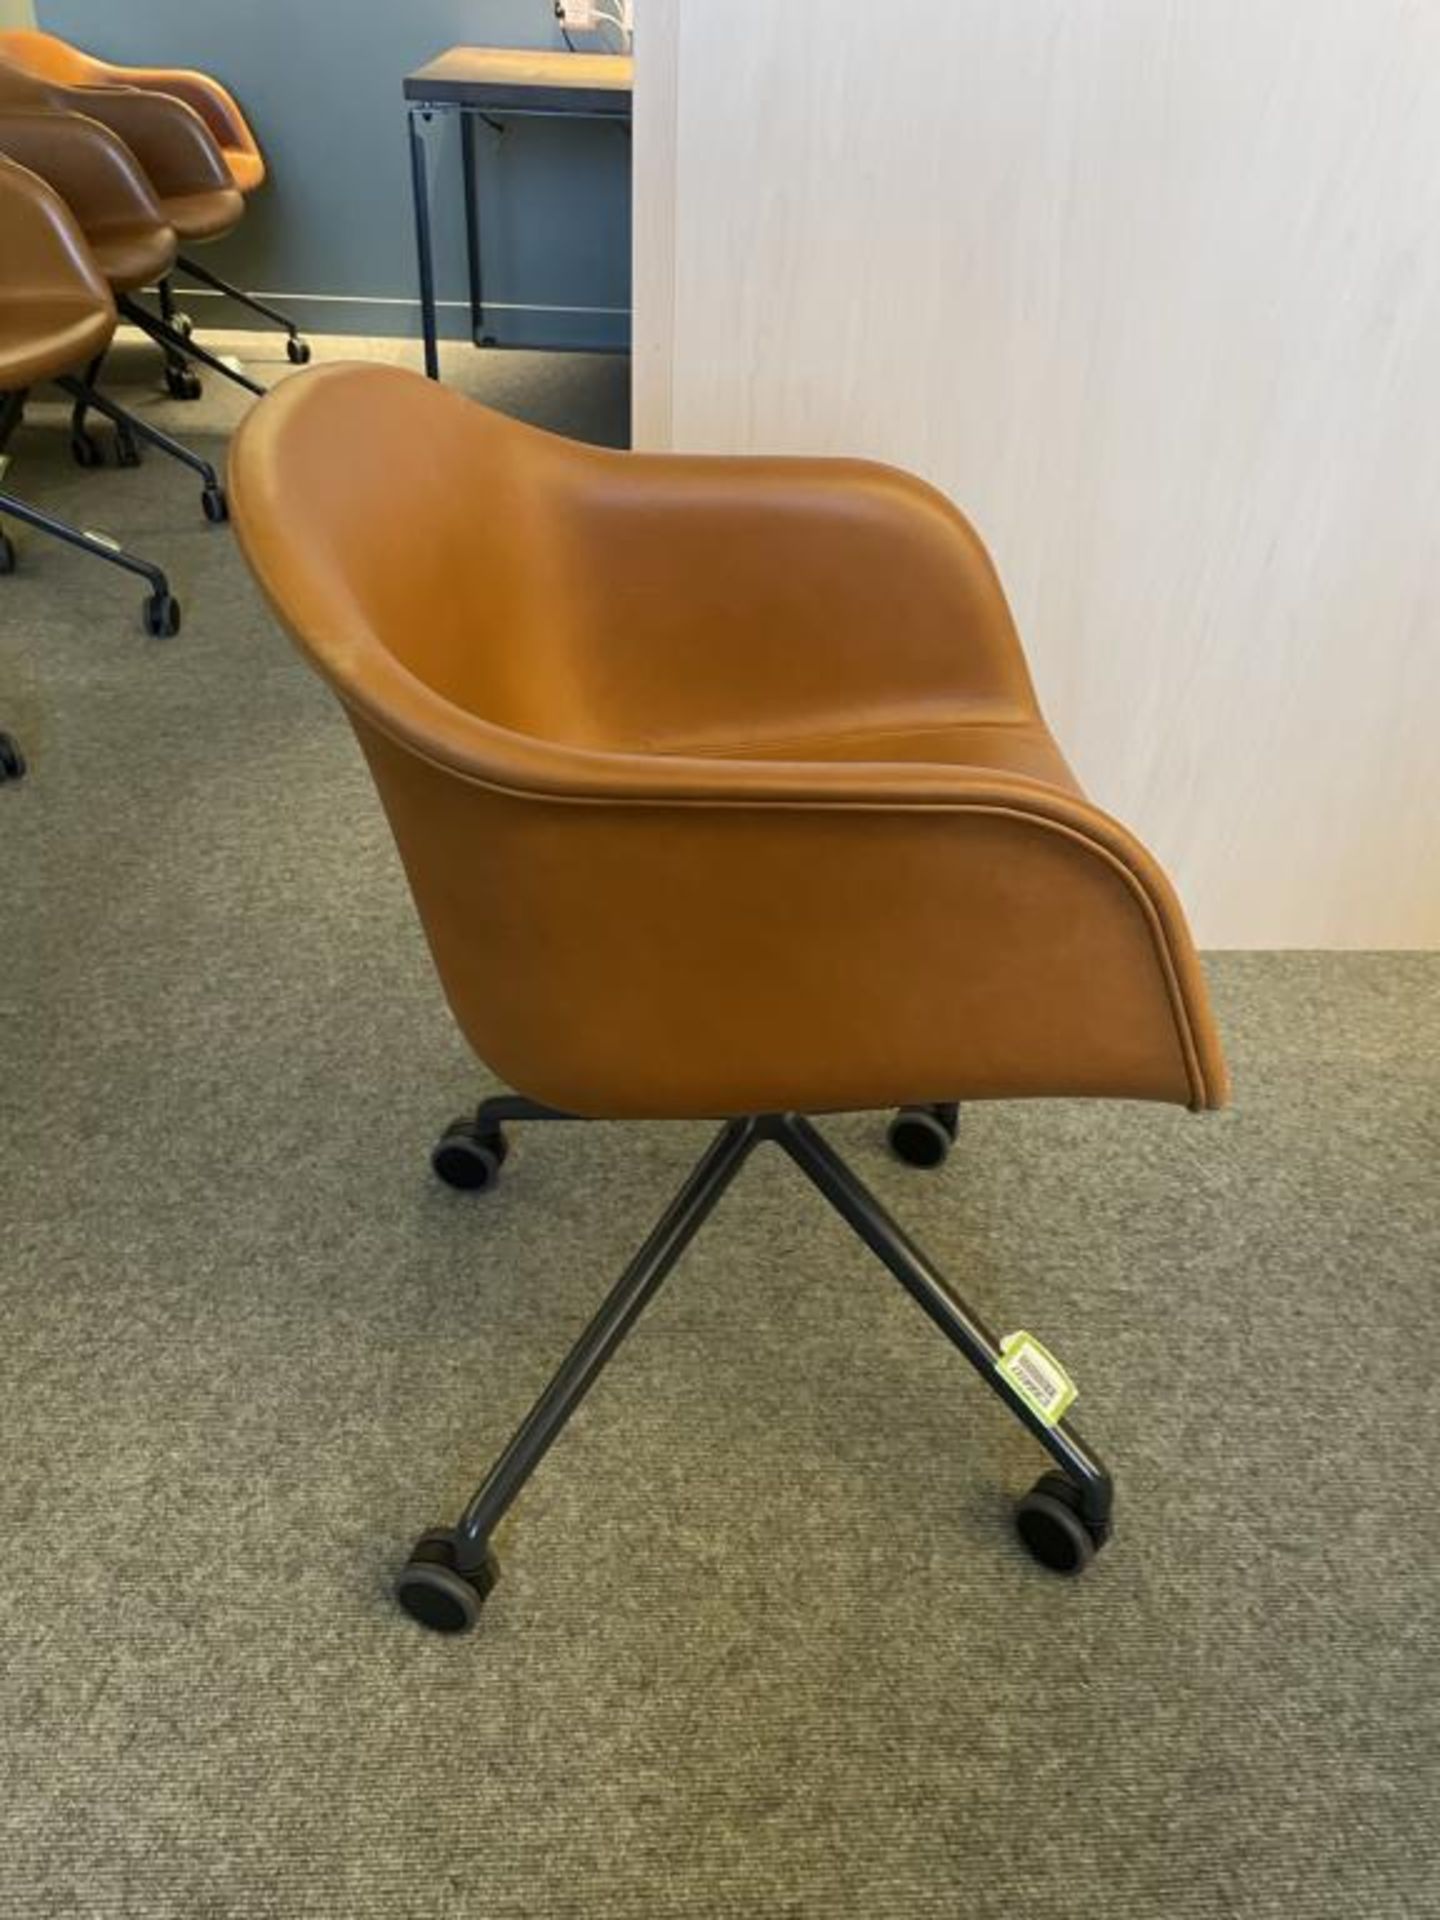 Muuto Fiber Swivel Chair, Casters, Leather - Image 3 of 7